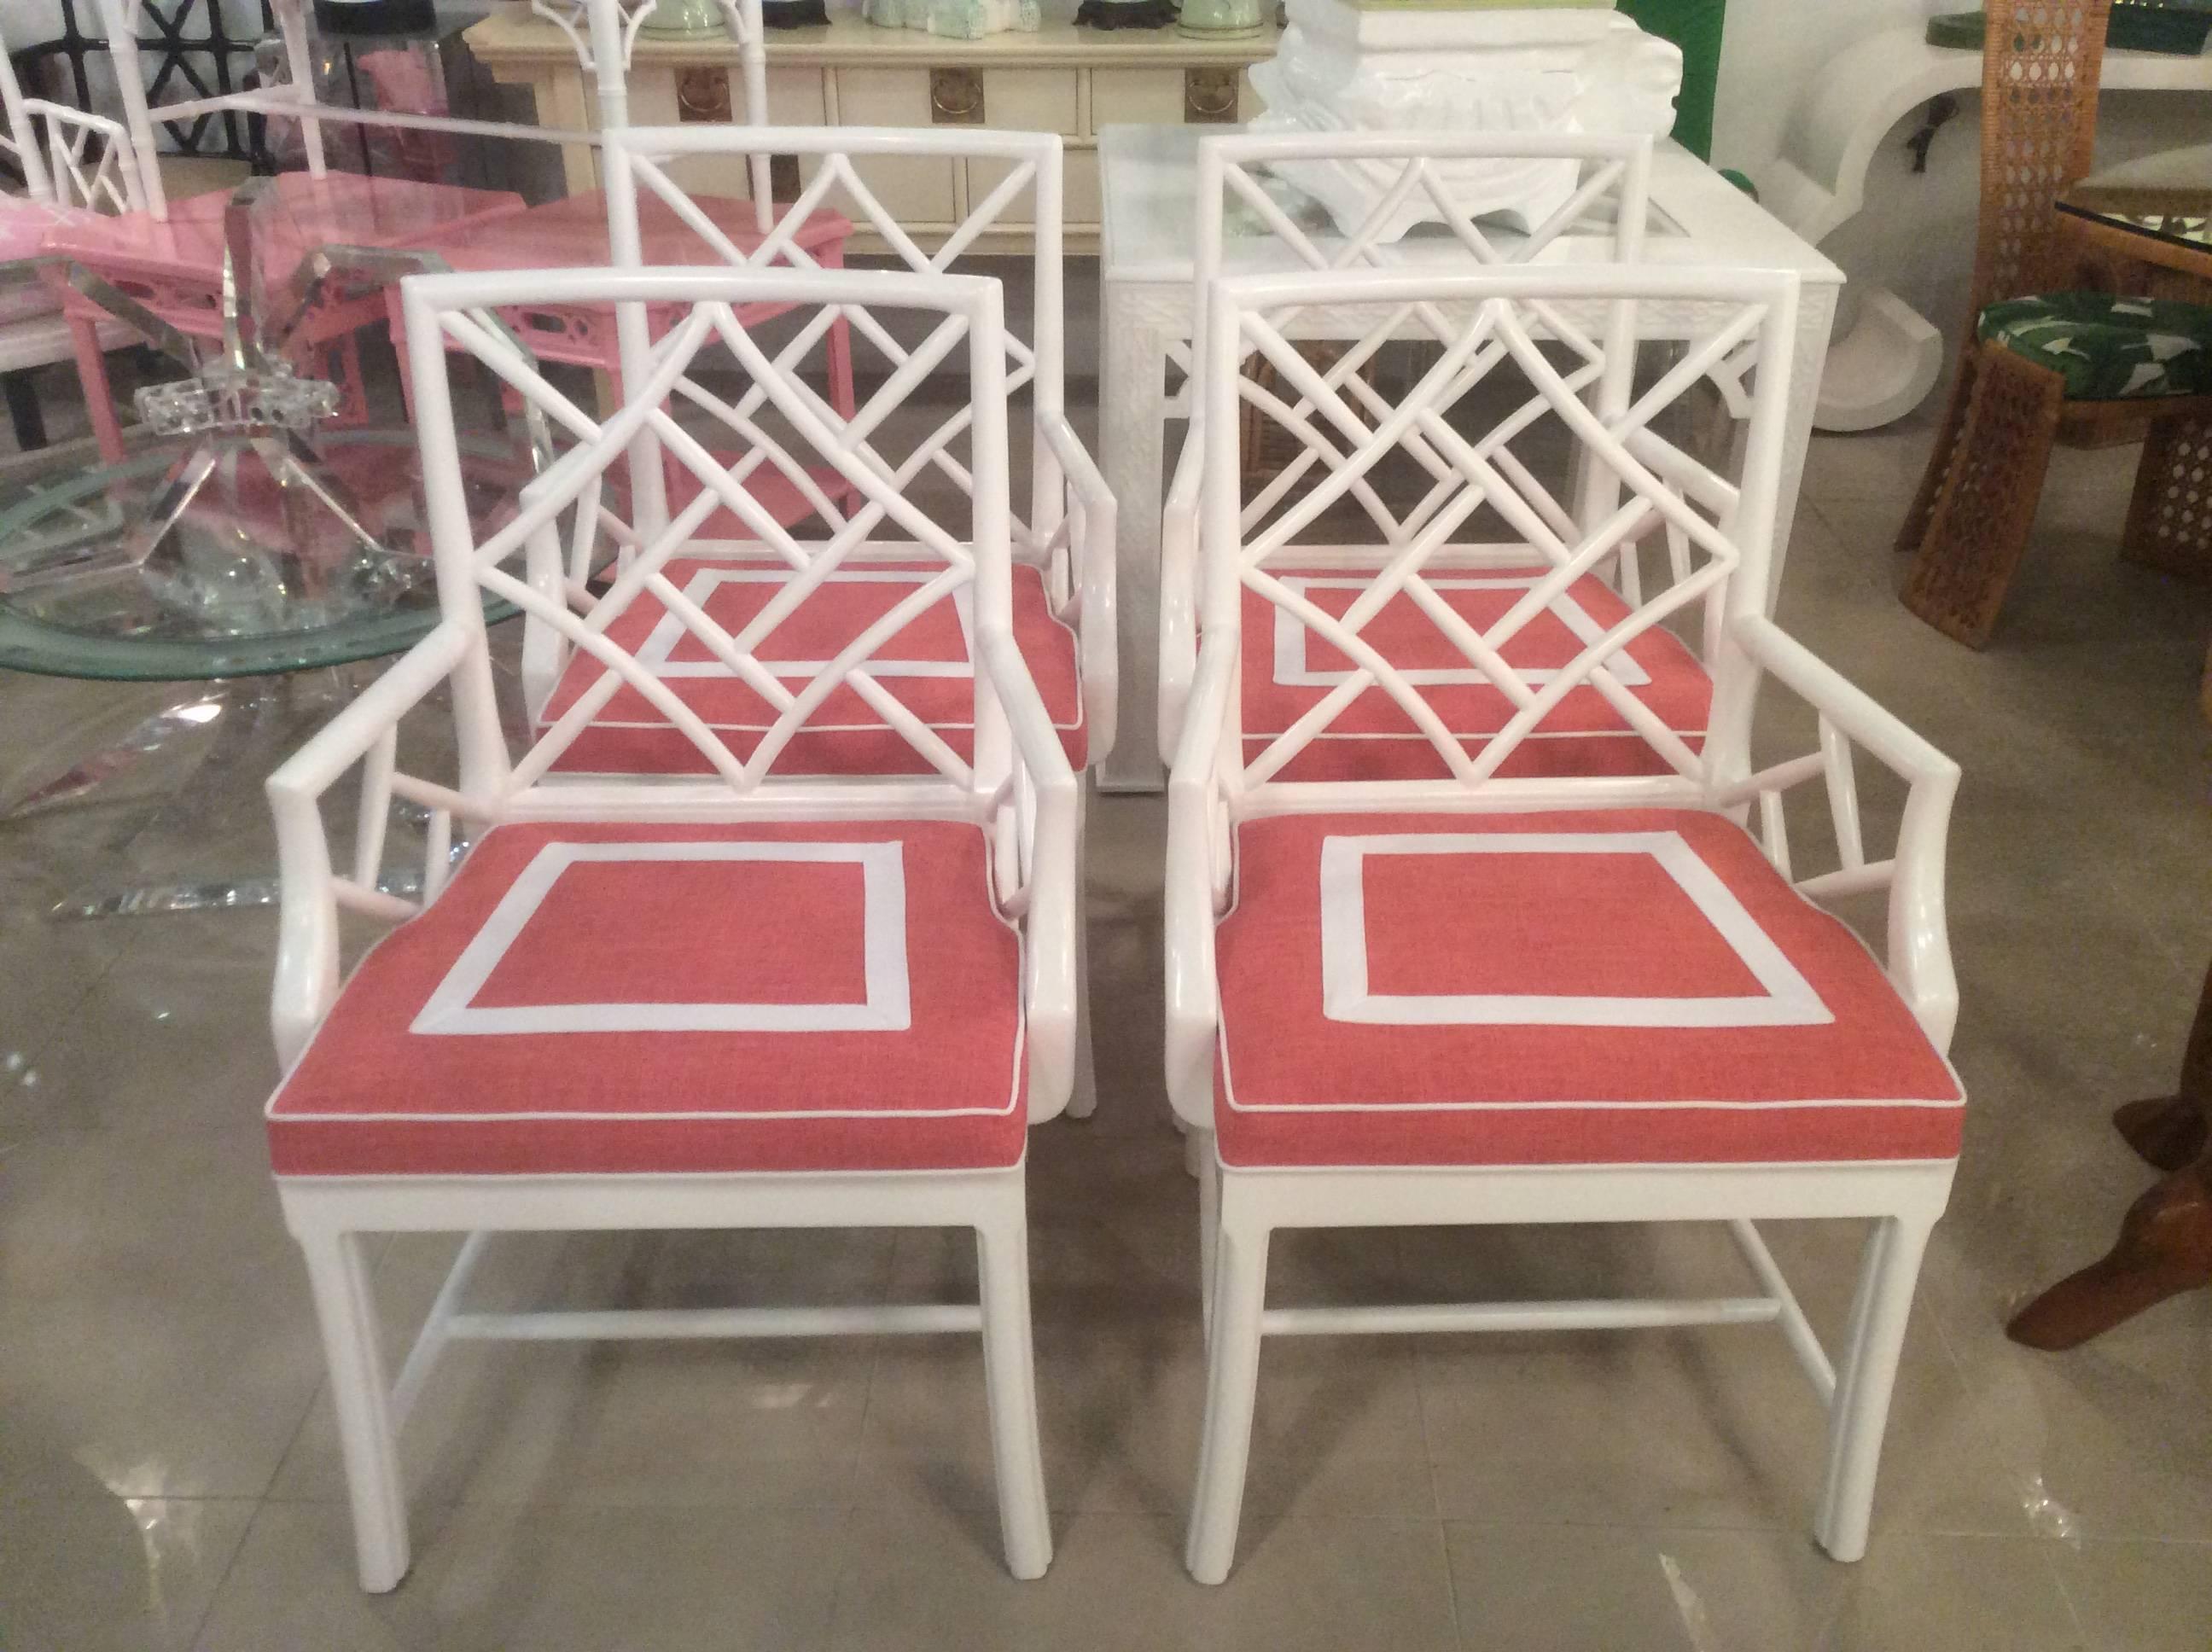 Beautiful set of 4 vintage Chinese Chippendale Cockpen dining room arm chairs in a newly lacquered white gloss finish. Custom newly upholstered cushions with a coral linen fabric and white box inset. Perfect for a Palm Beach decor! 